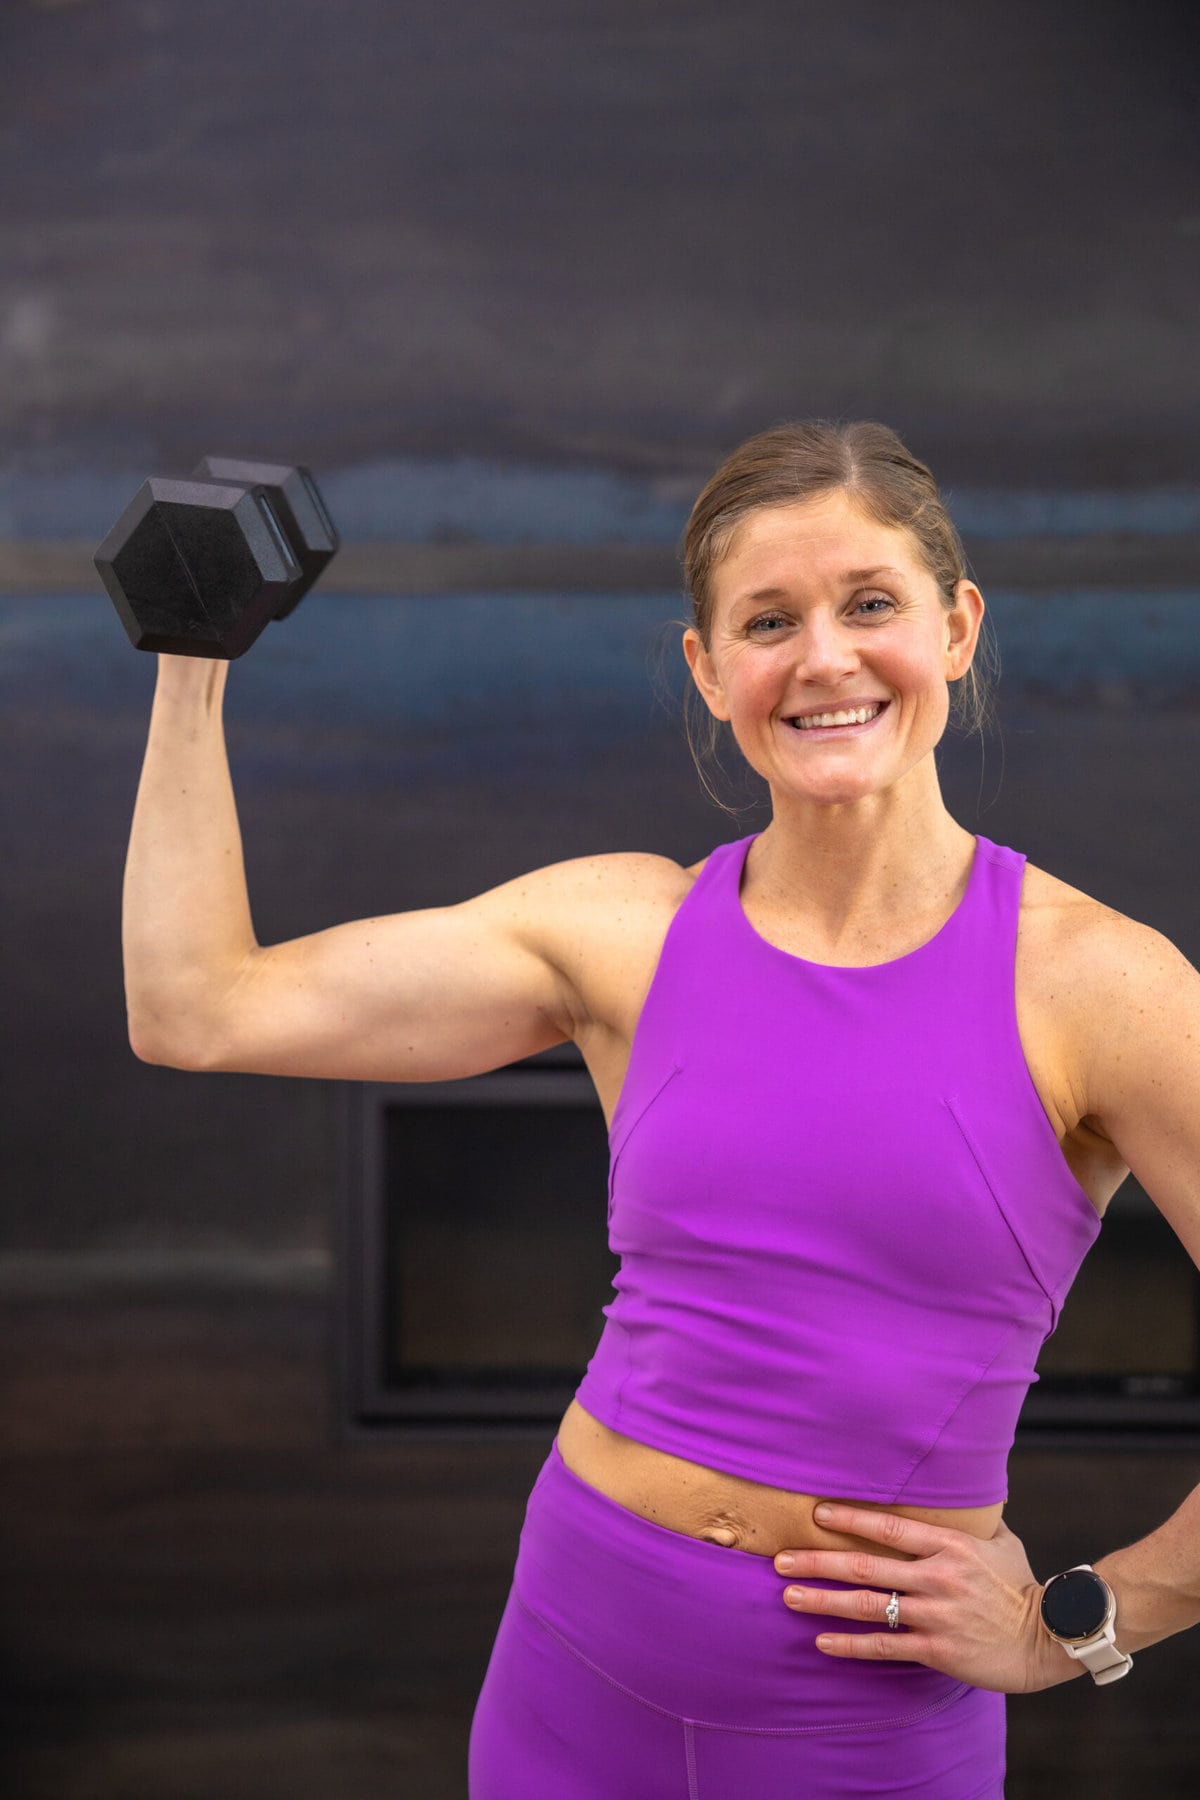 Sculpt Your Arms in 5 Exercises Ultimate Arm Workout for Women!